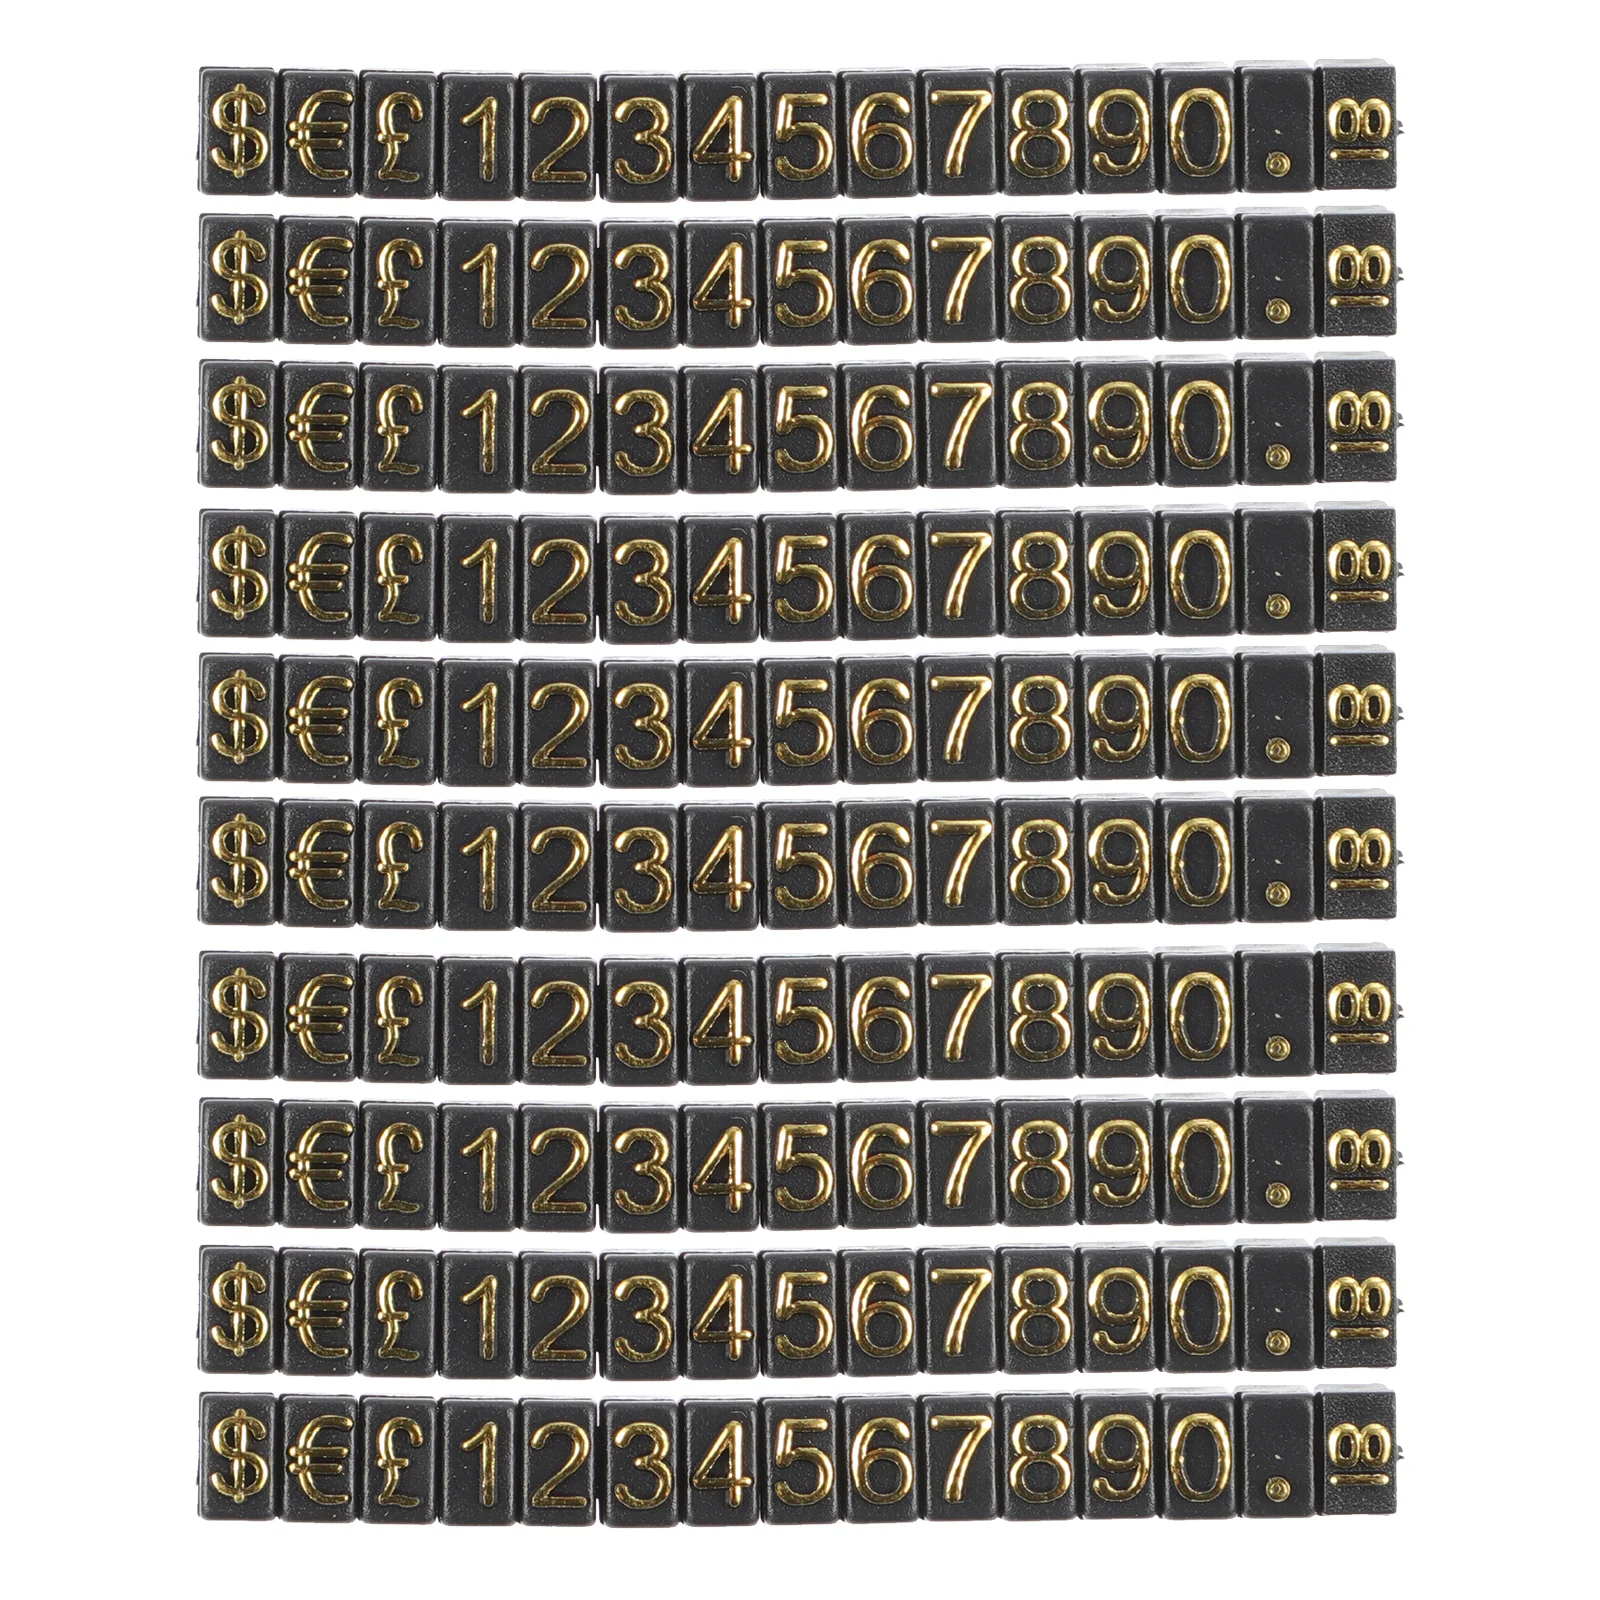 

10 Pcs Emblems Price Tag Number Tags Shopping Mall Signs Commodity Boards Jewelry Supermarket Labels with Numbers Advertising